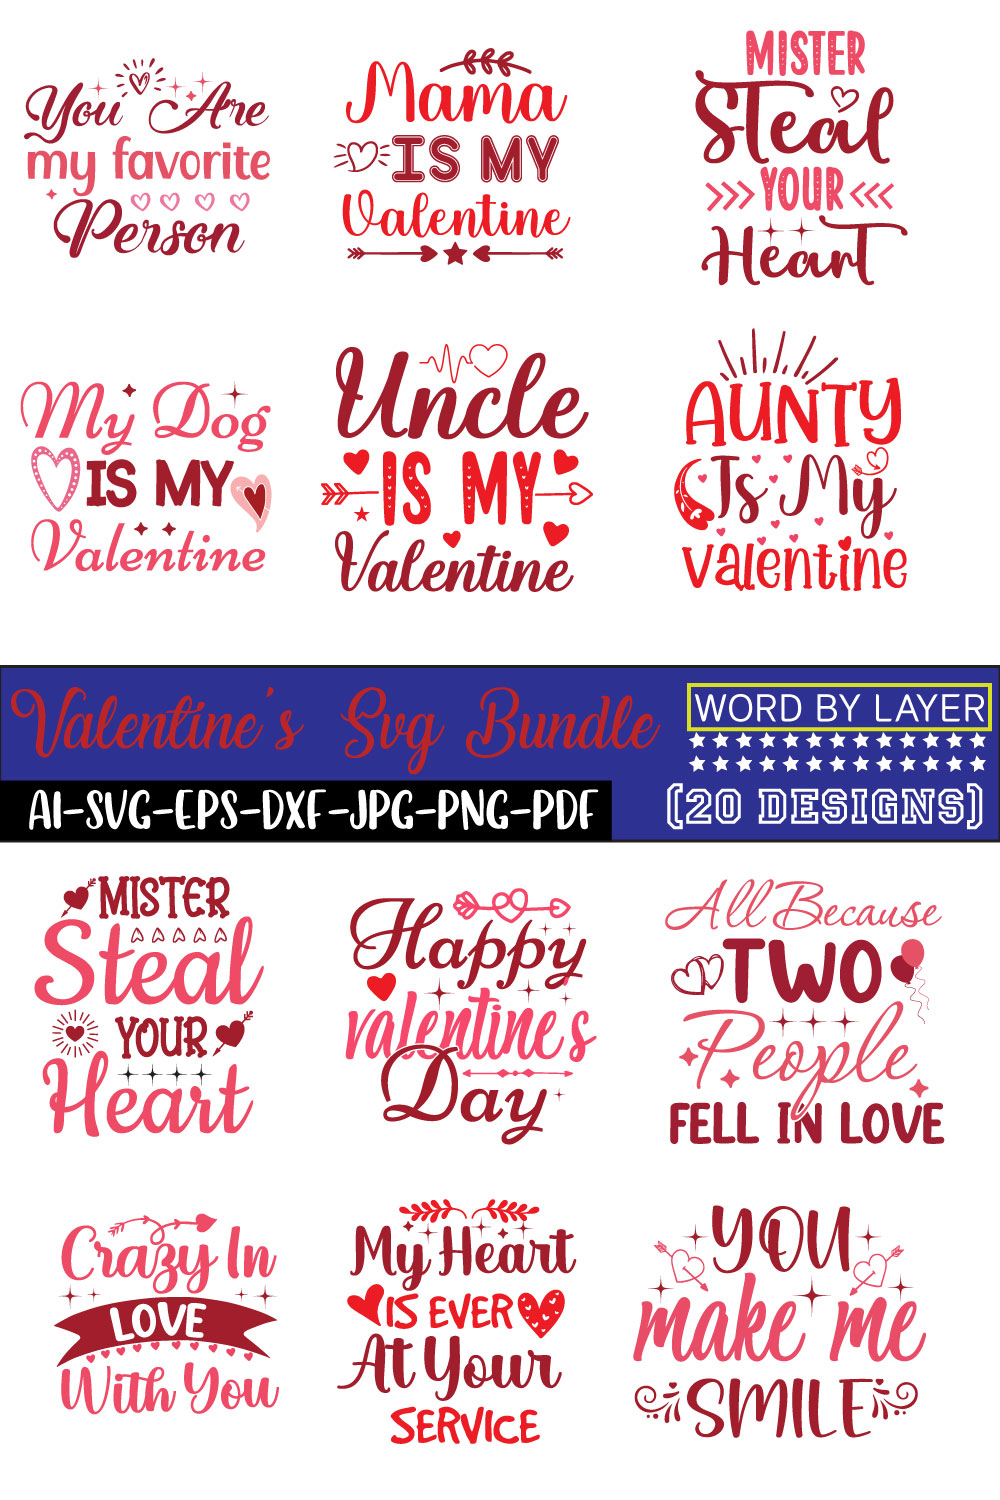 A collection of amazing images for prints on the theme of Valentines Day.